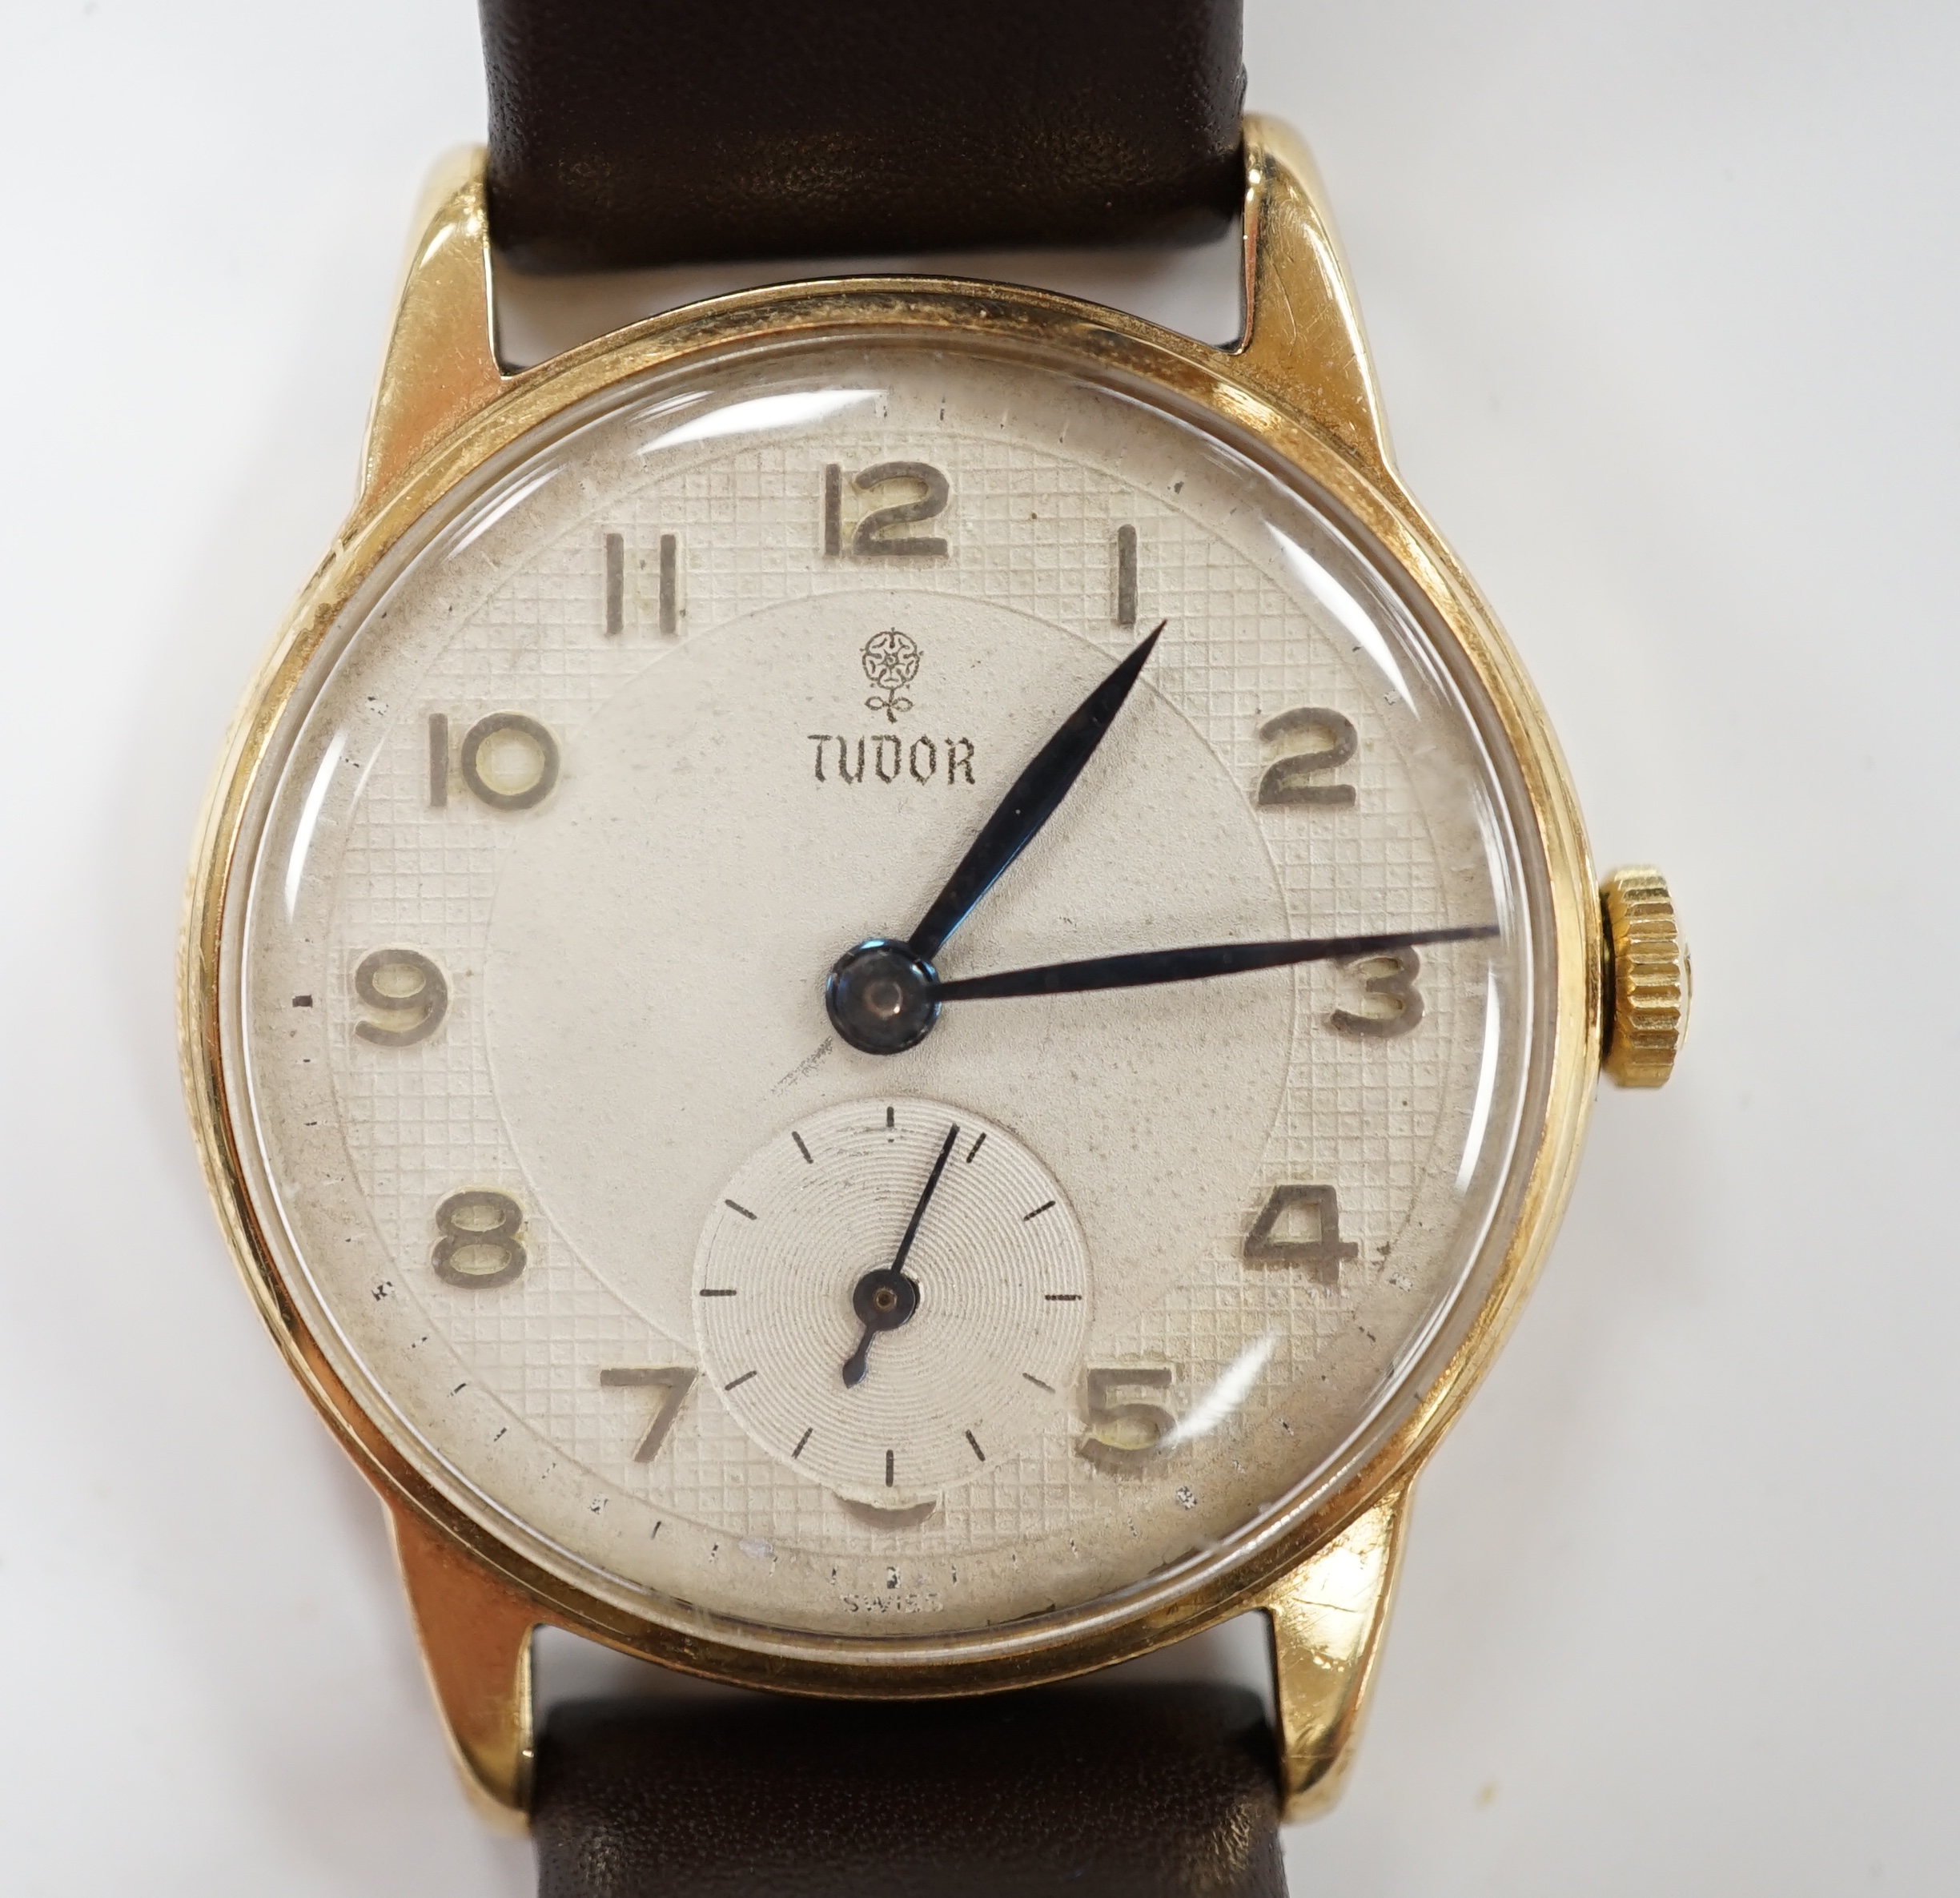 A gentleman's 9ct gold Tudor manual wind wrist watch, with Arabic dial and subsidiary seconds, on later associated strap, case diameter 31mm.